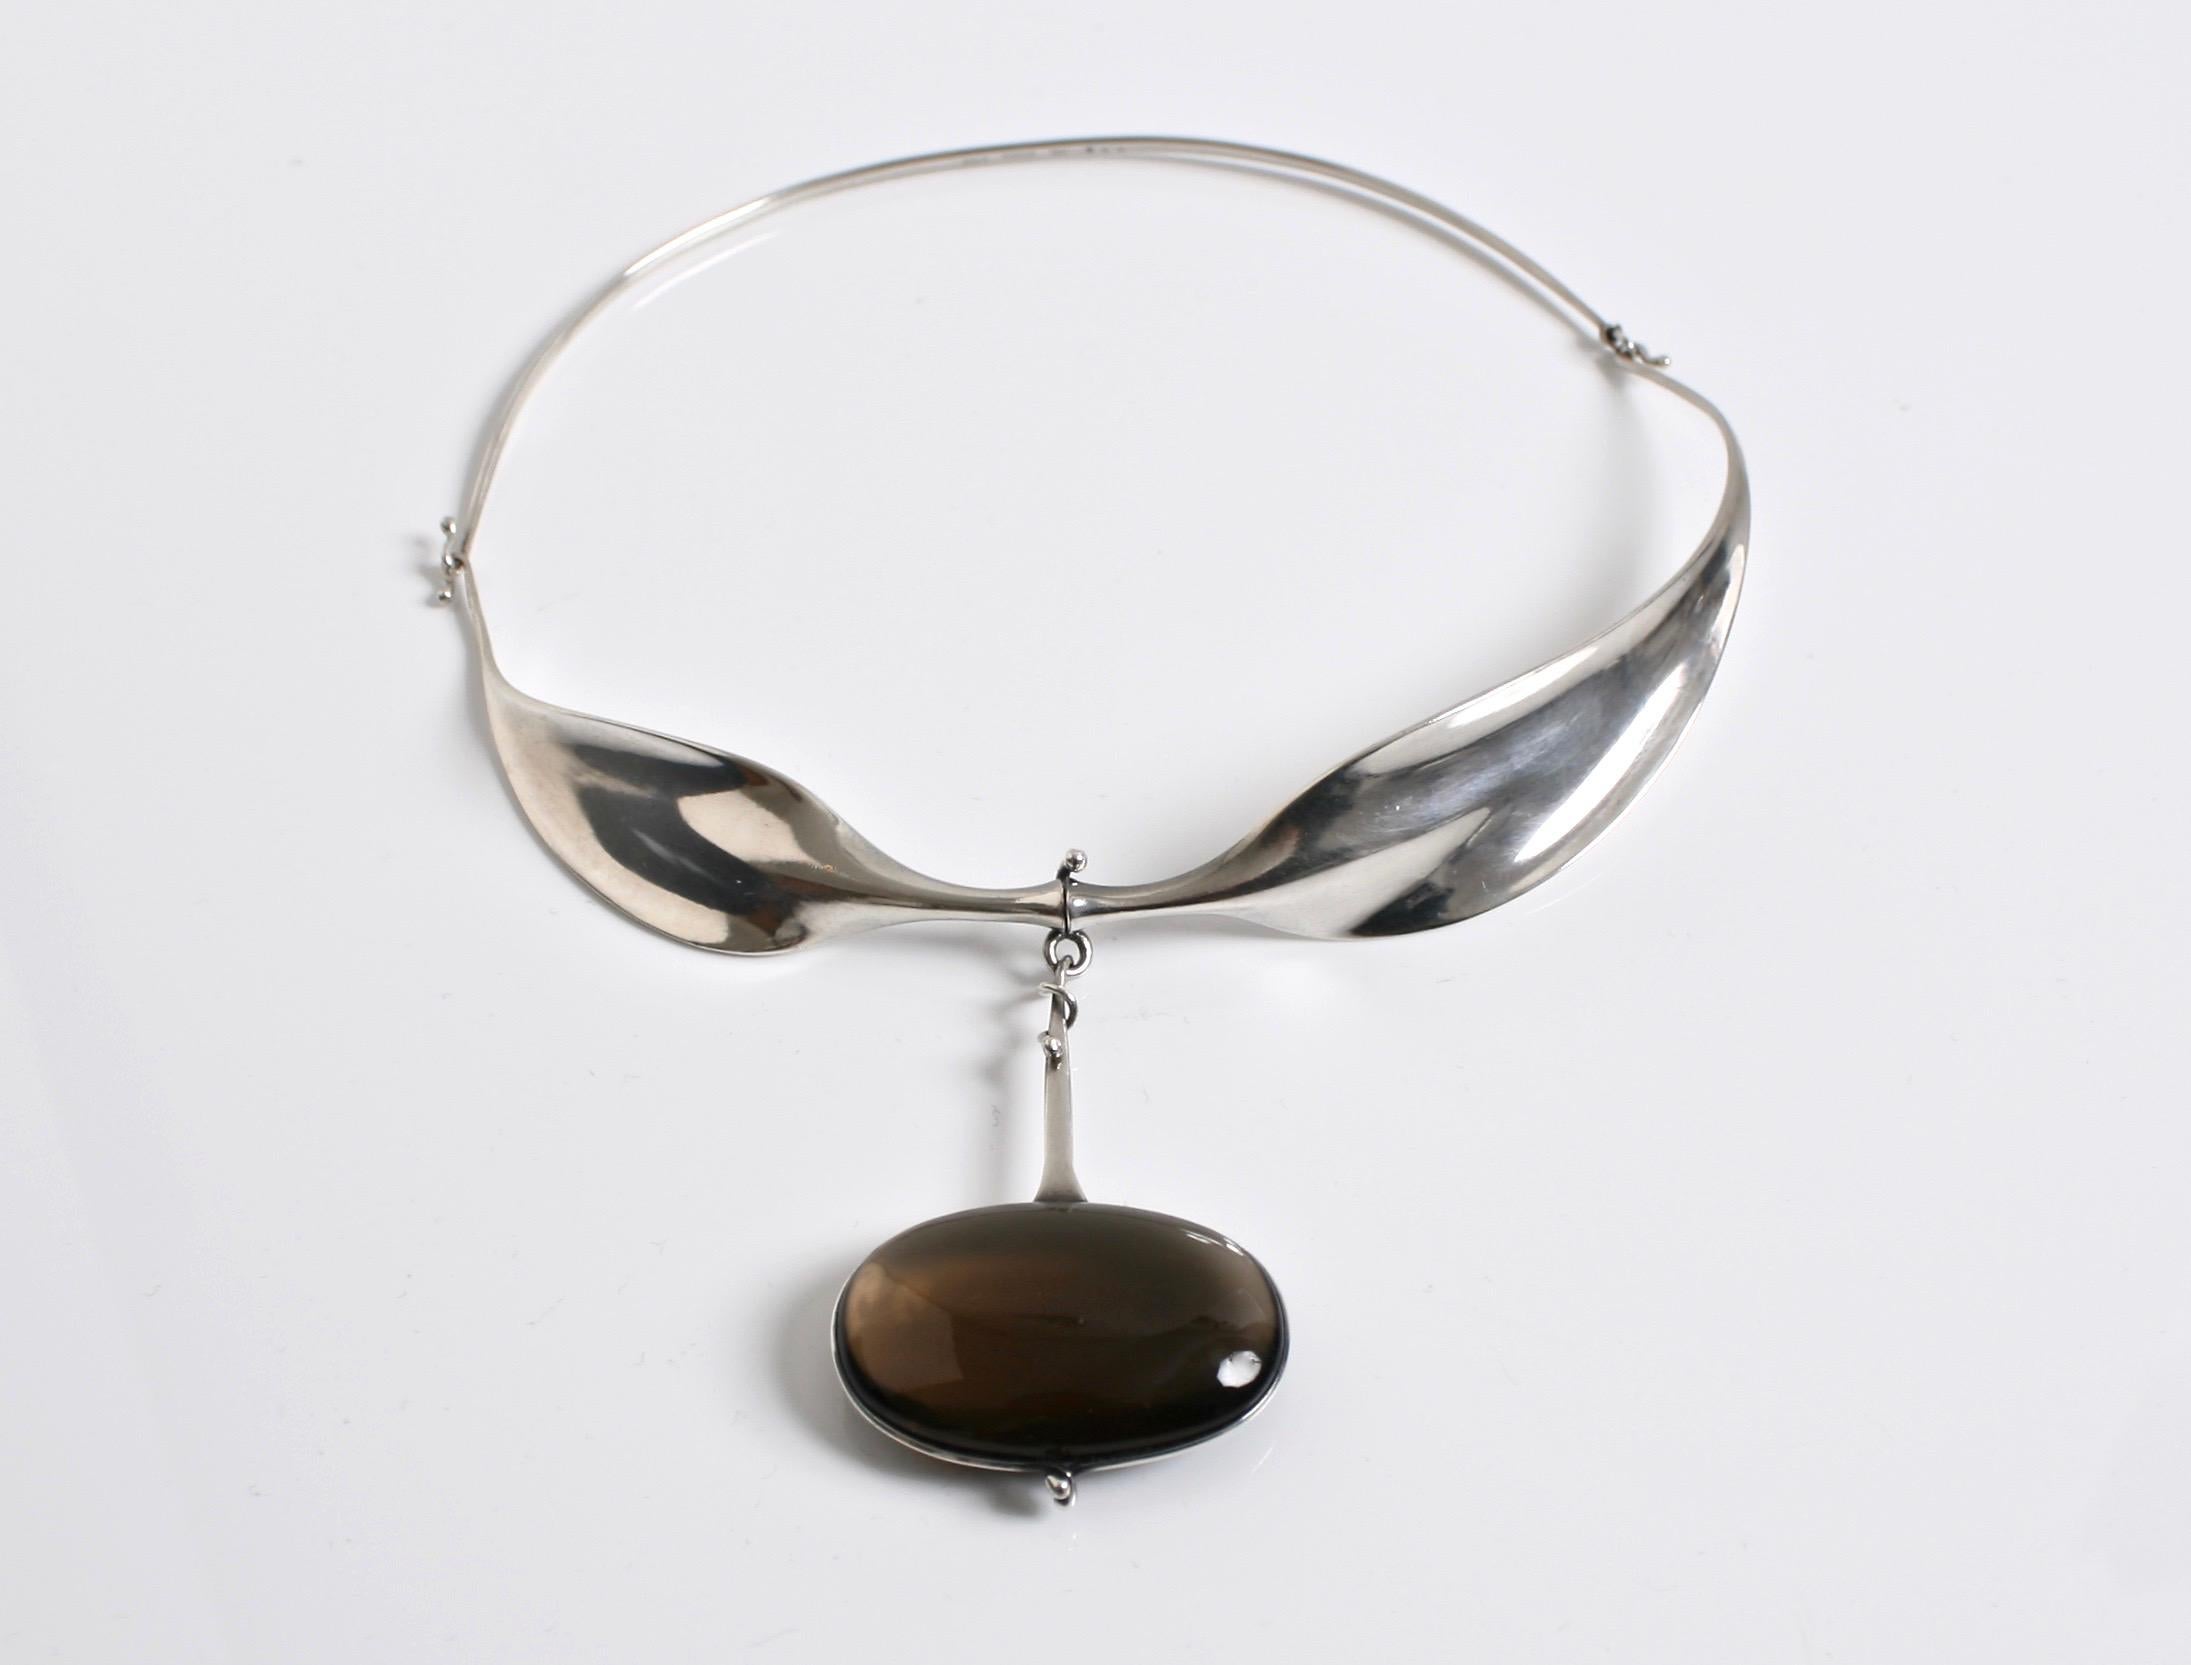 Early Vivianna Torun Bulow-Hube sterling silver & Smokey Quartz  drop & collar made by Georg Jensen Denmark c.1970 Very rare item marked Torun/Georg Jensen The drop is a spectacular oval, design number 242 hanging from a much sought after neckring